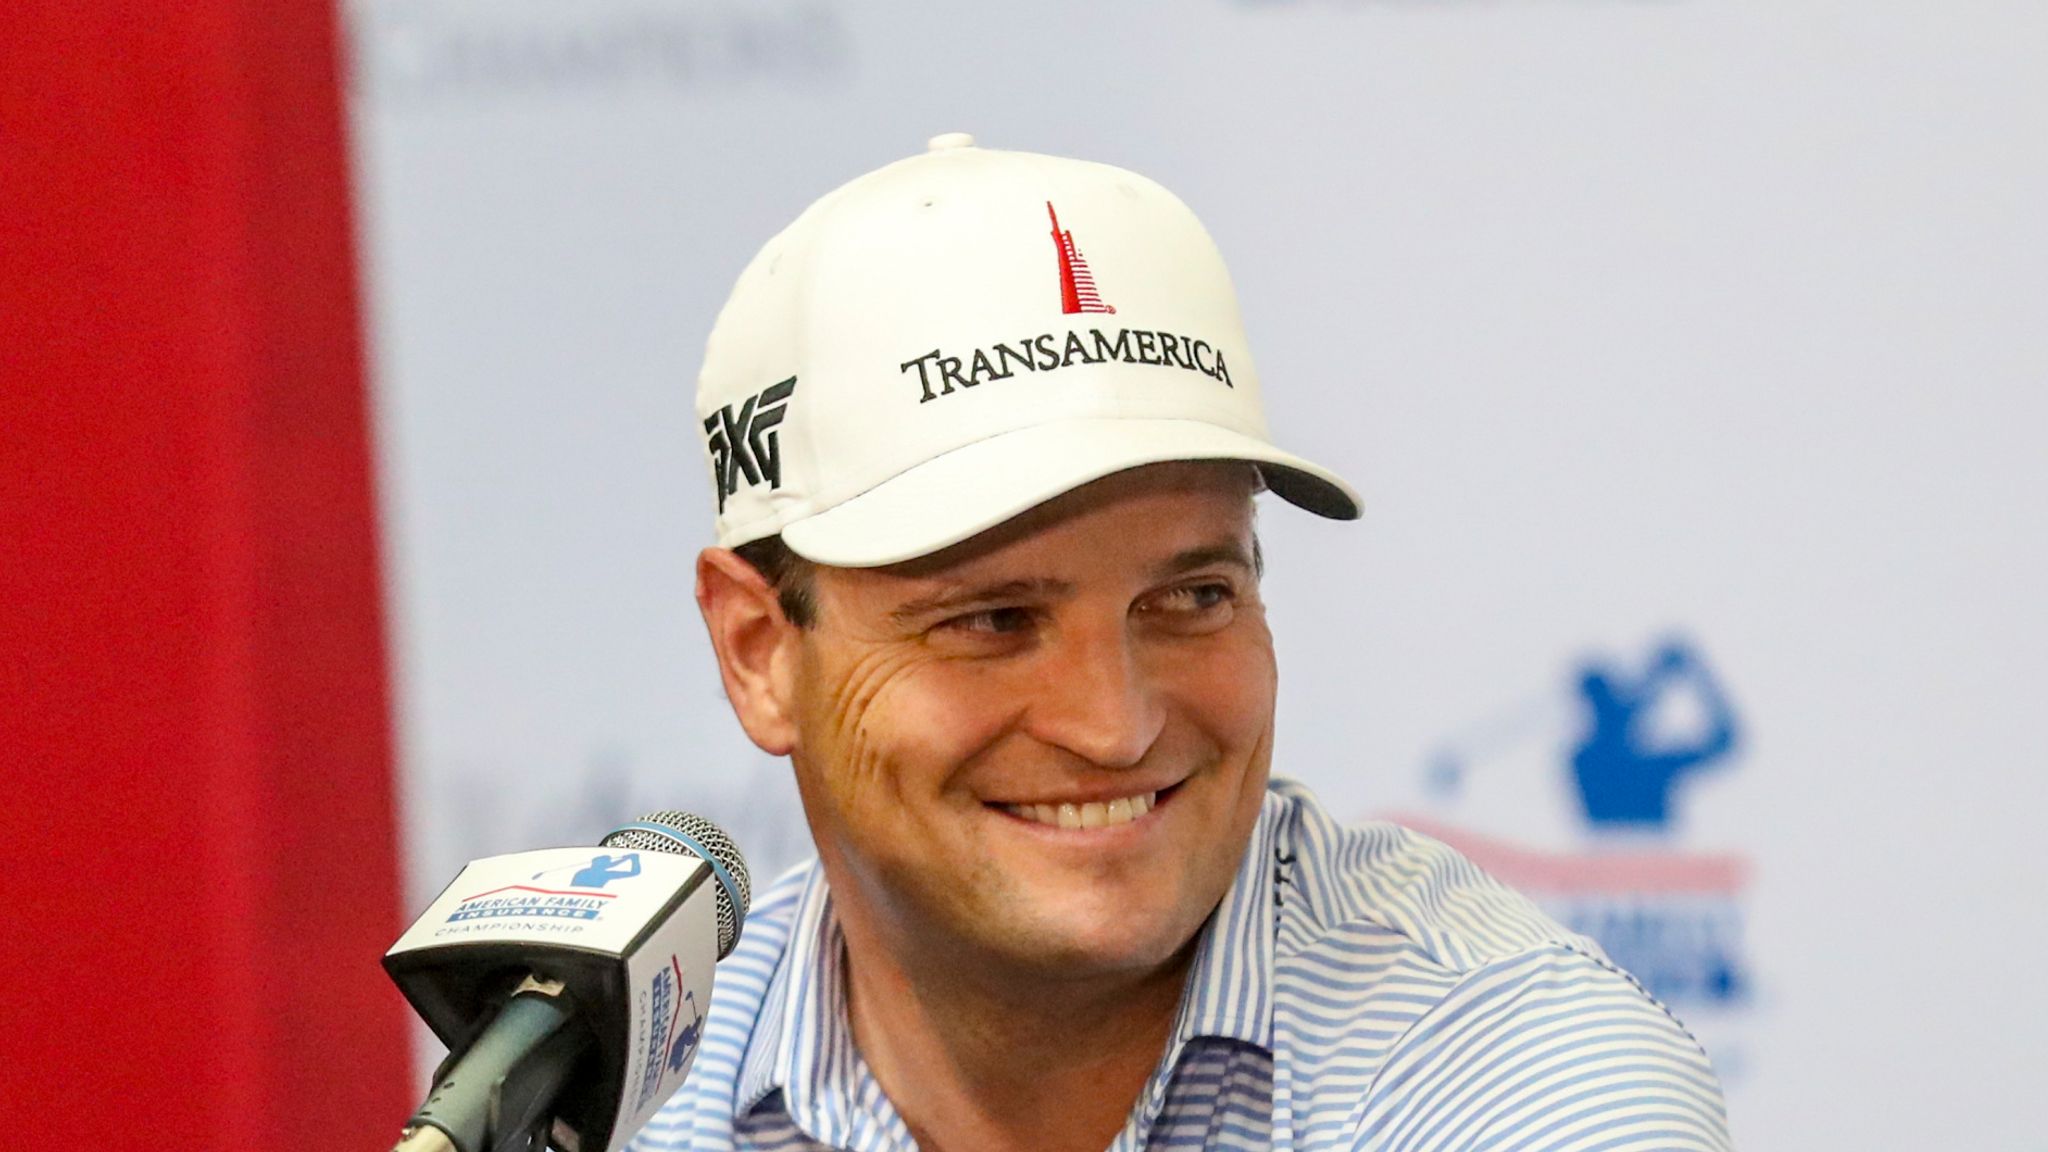 Ryder Cup Liv Golf Players Technically Eligible For Us Team Says Captain Zach Johnson Golf 